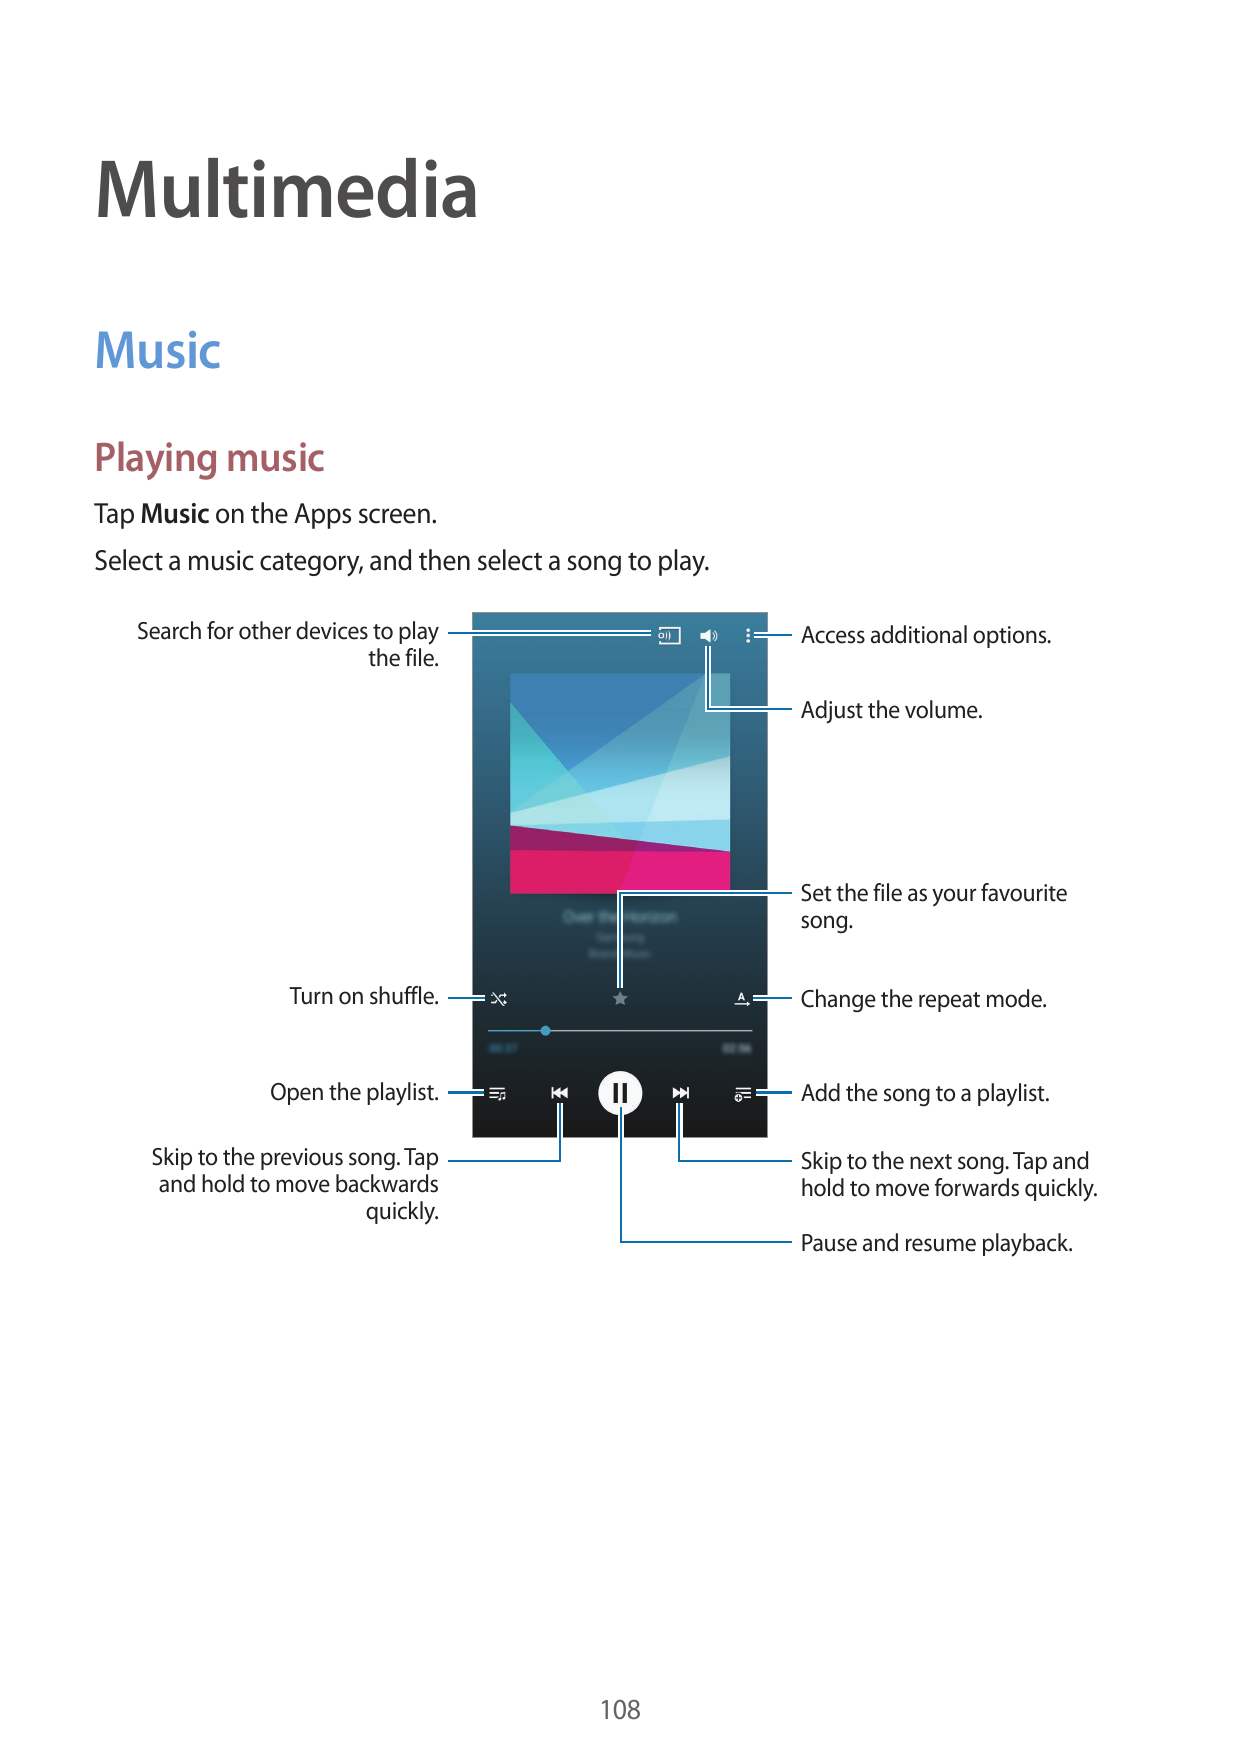 MultimediaMusicPlaying musicTap Music on the Apps screen.Select a music category, and then select a song to play.Search for othe